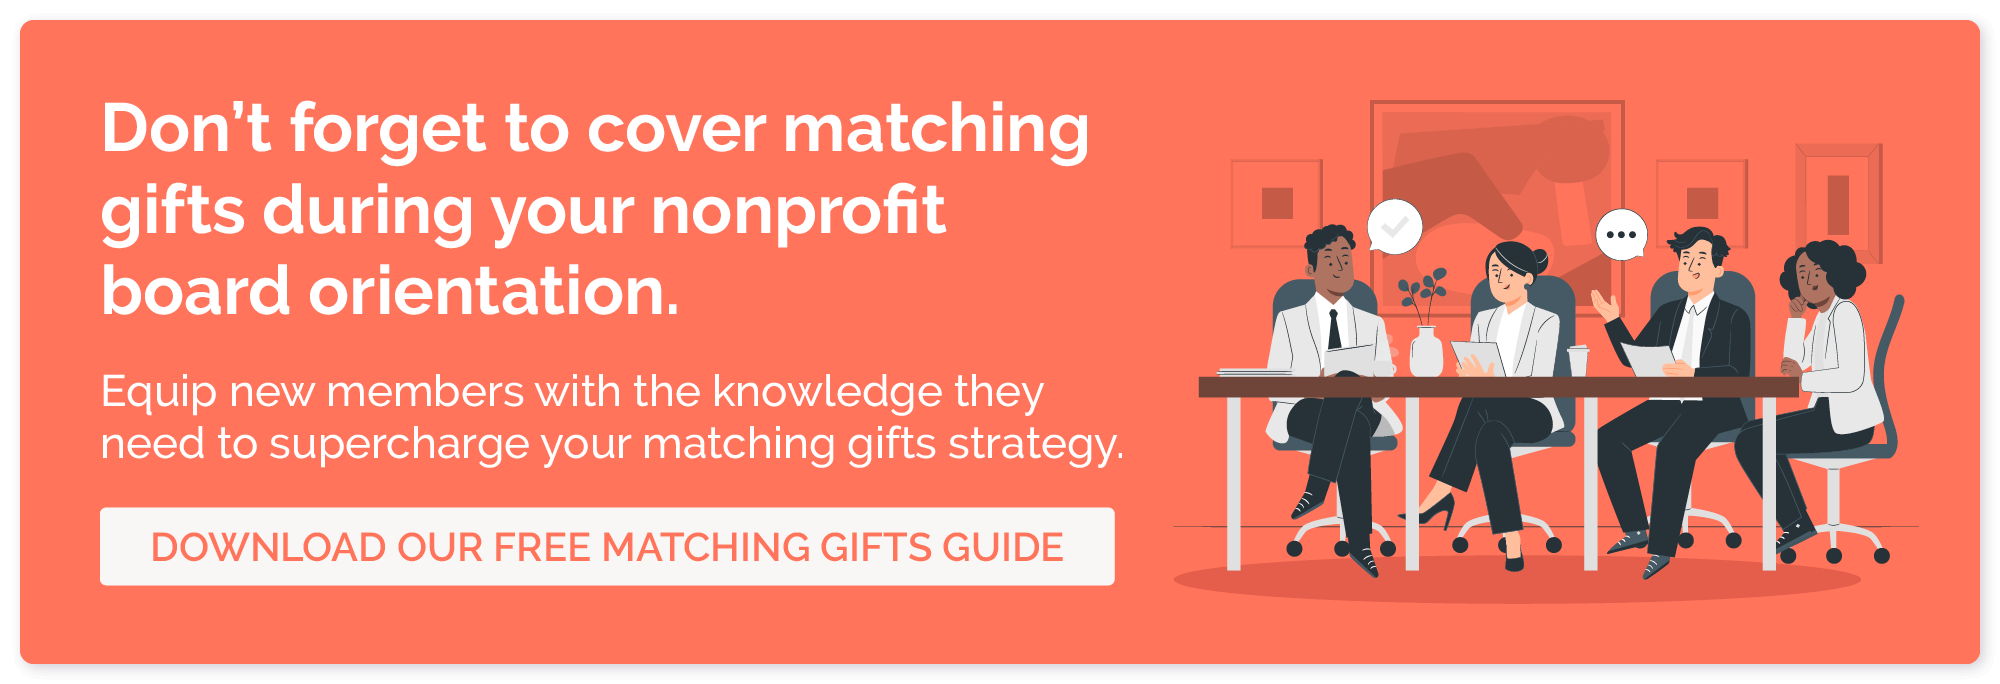 Teach your new board members about matching gifts during your nonprofit board orientation with the help of our guide.